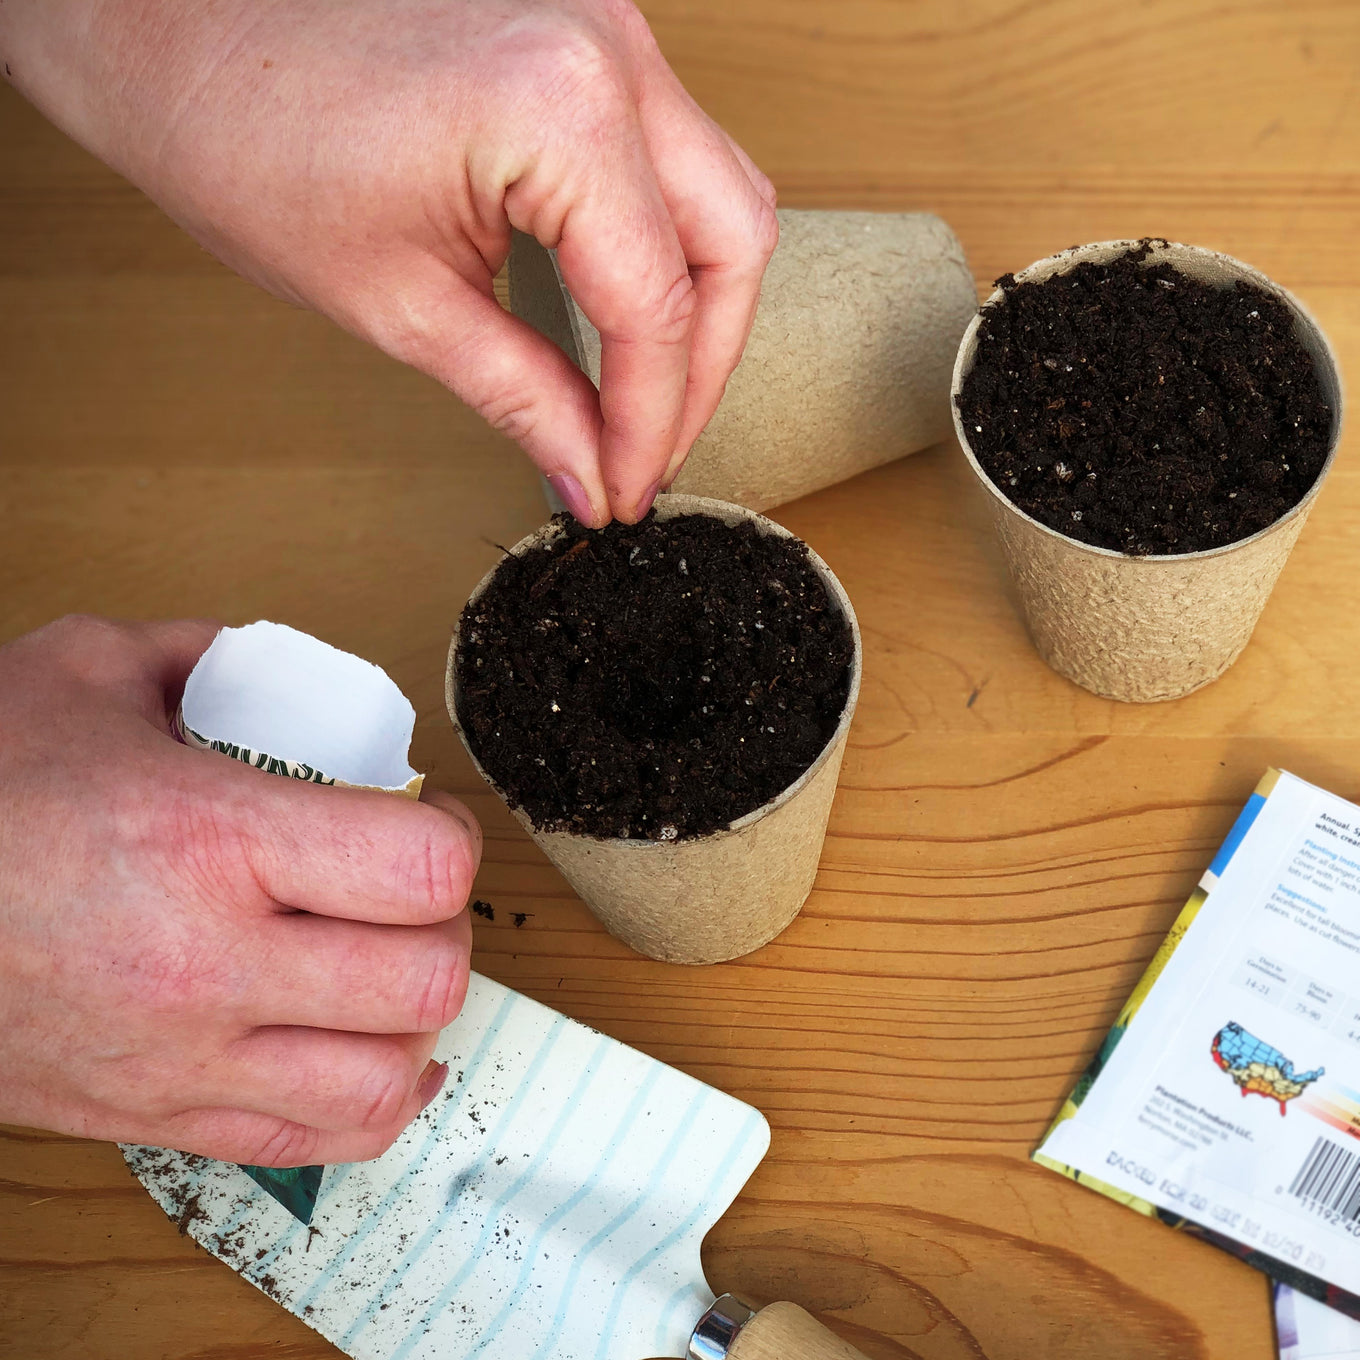 Starting Organic Black Beauty Zucchini Squash Seeds in Jiffy biodegradable peat pots filled with seed starting mix.